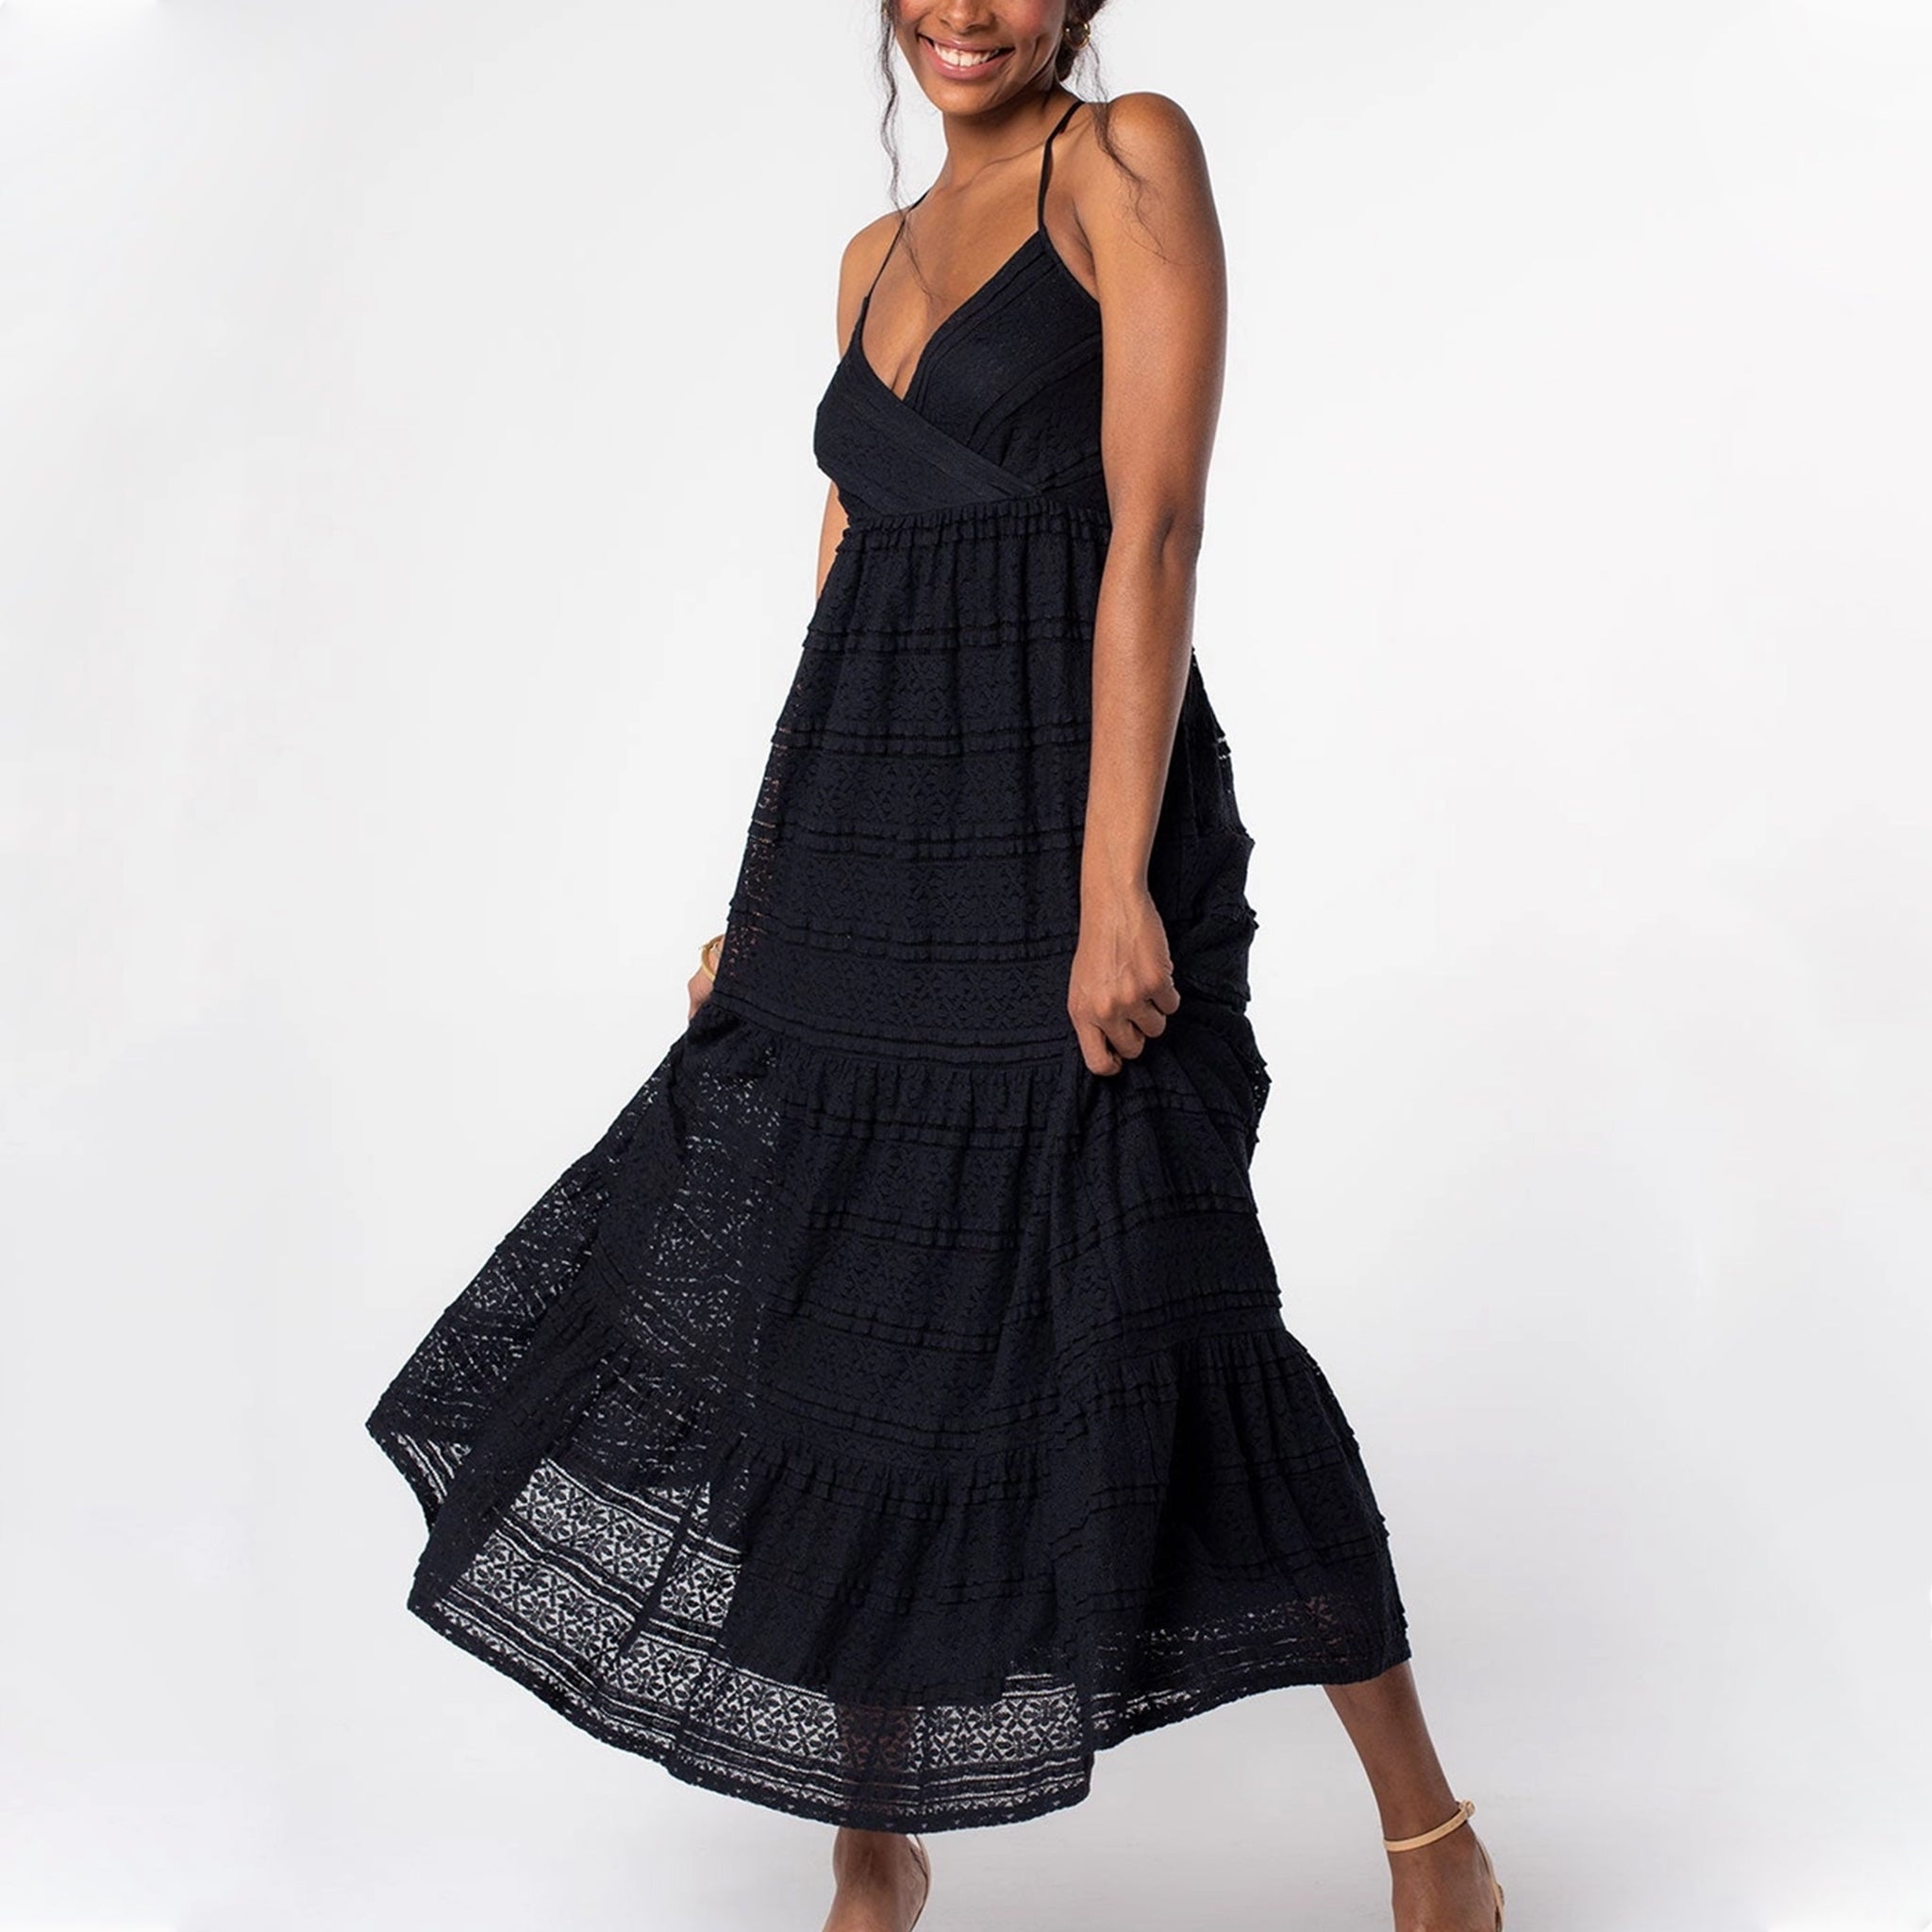 A black lace flowy dress with a v-neck and spaghetti straps that cross in the back. 